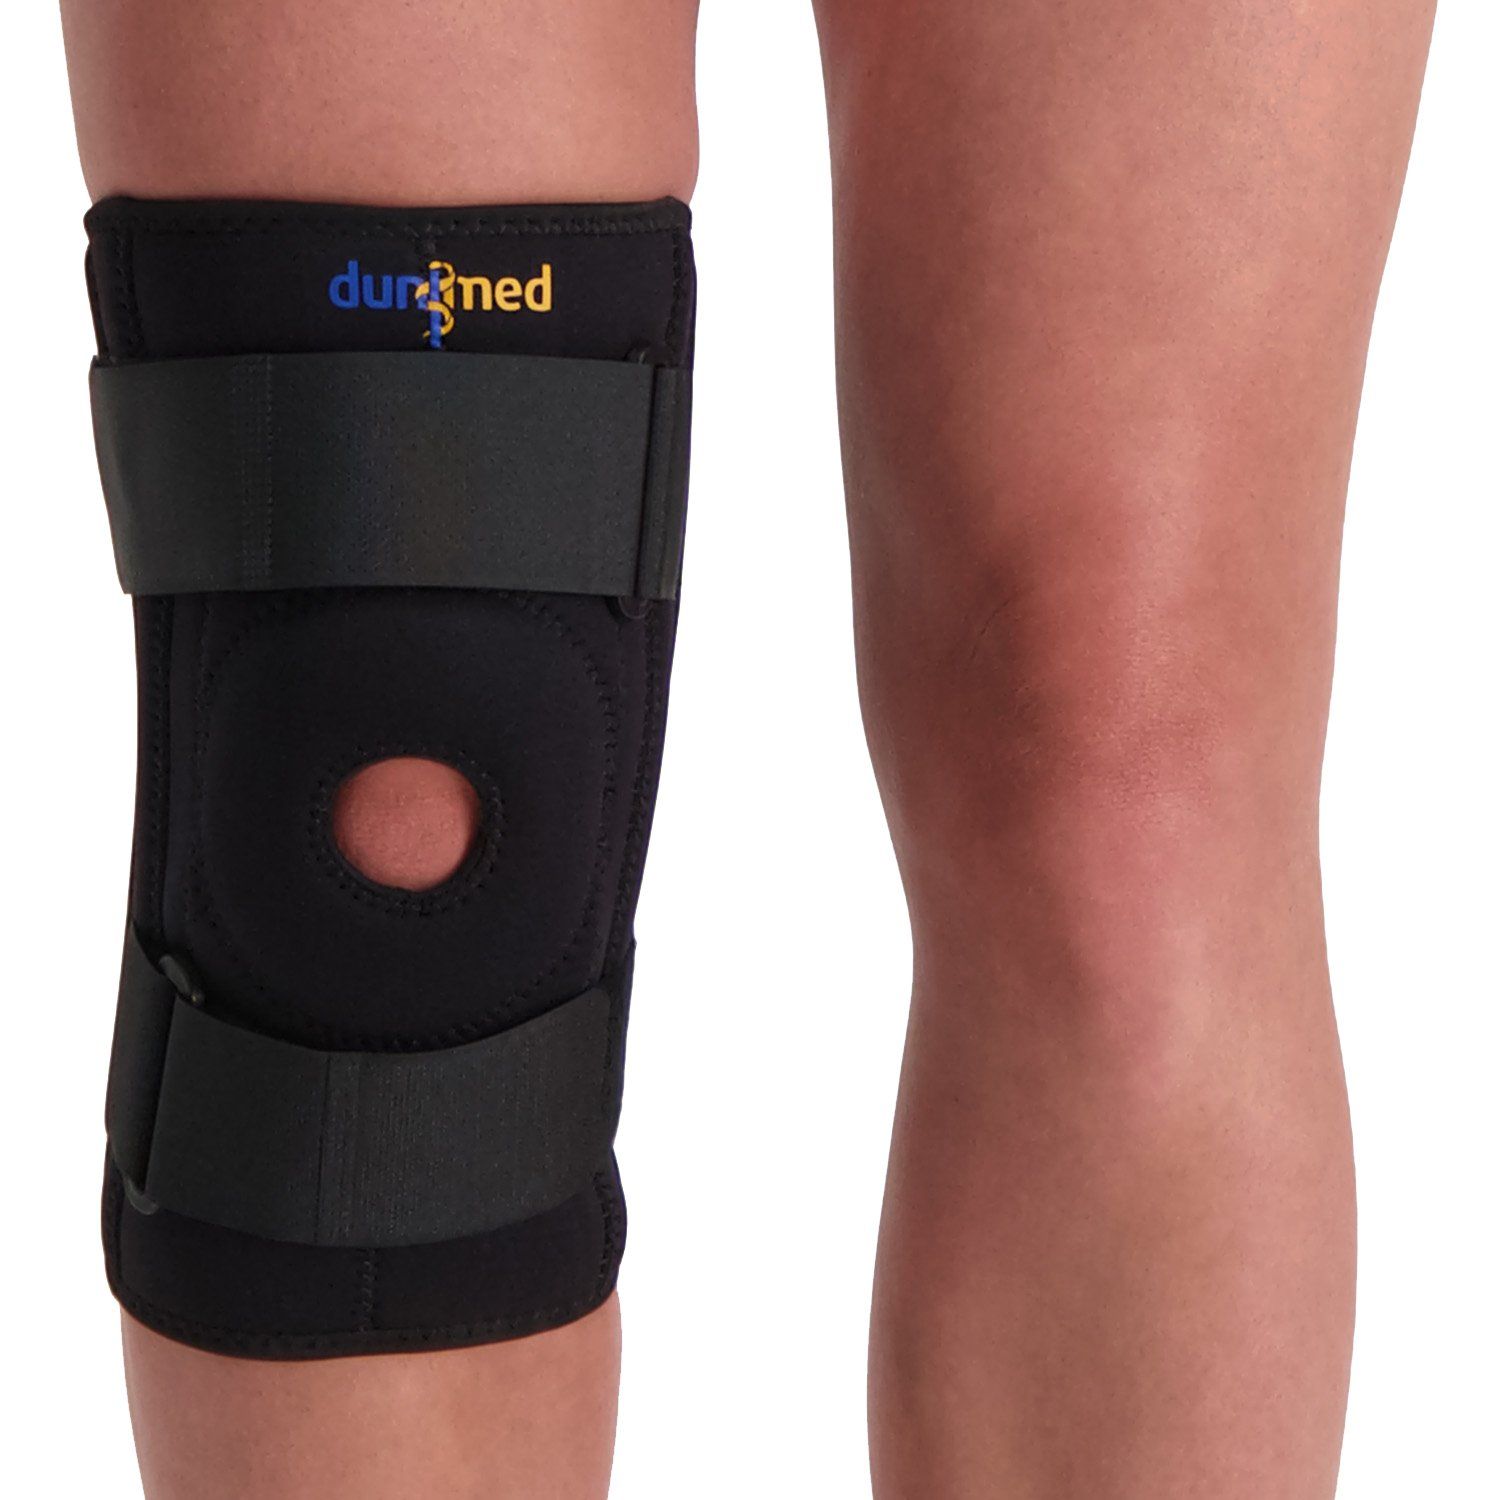 dunimed knee support with busks front view